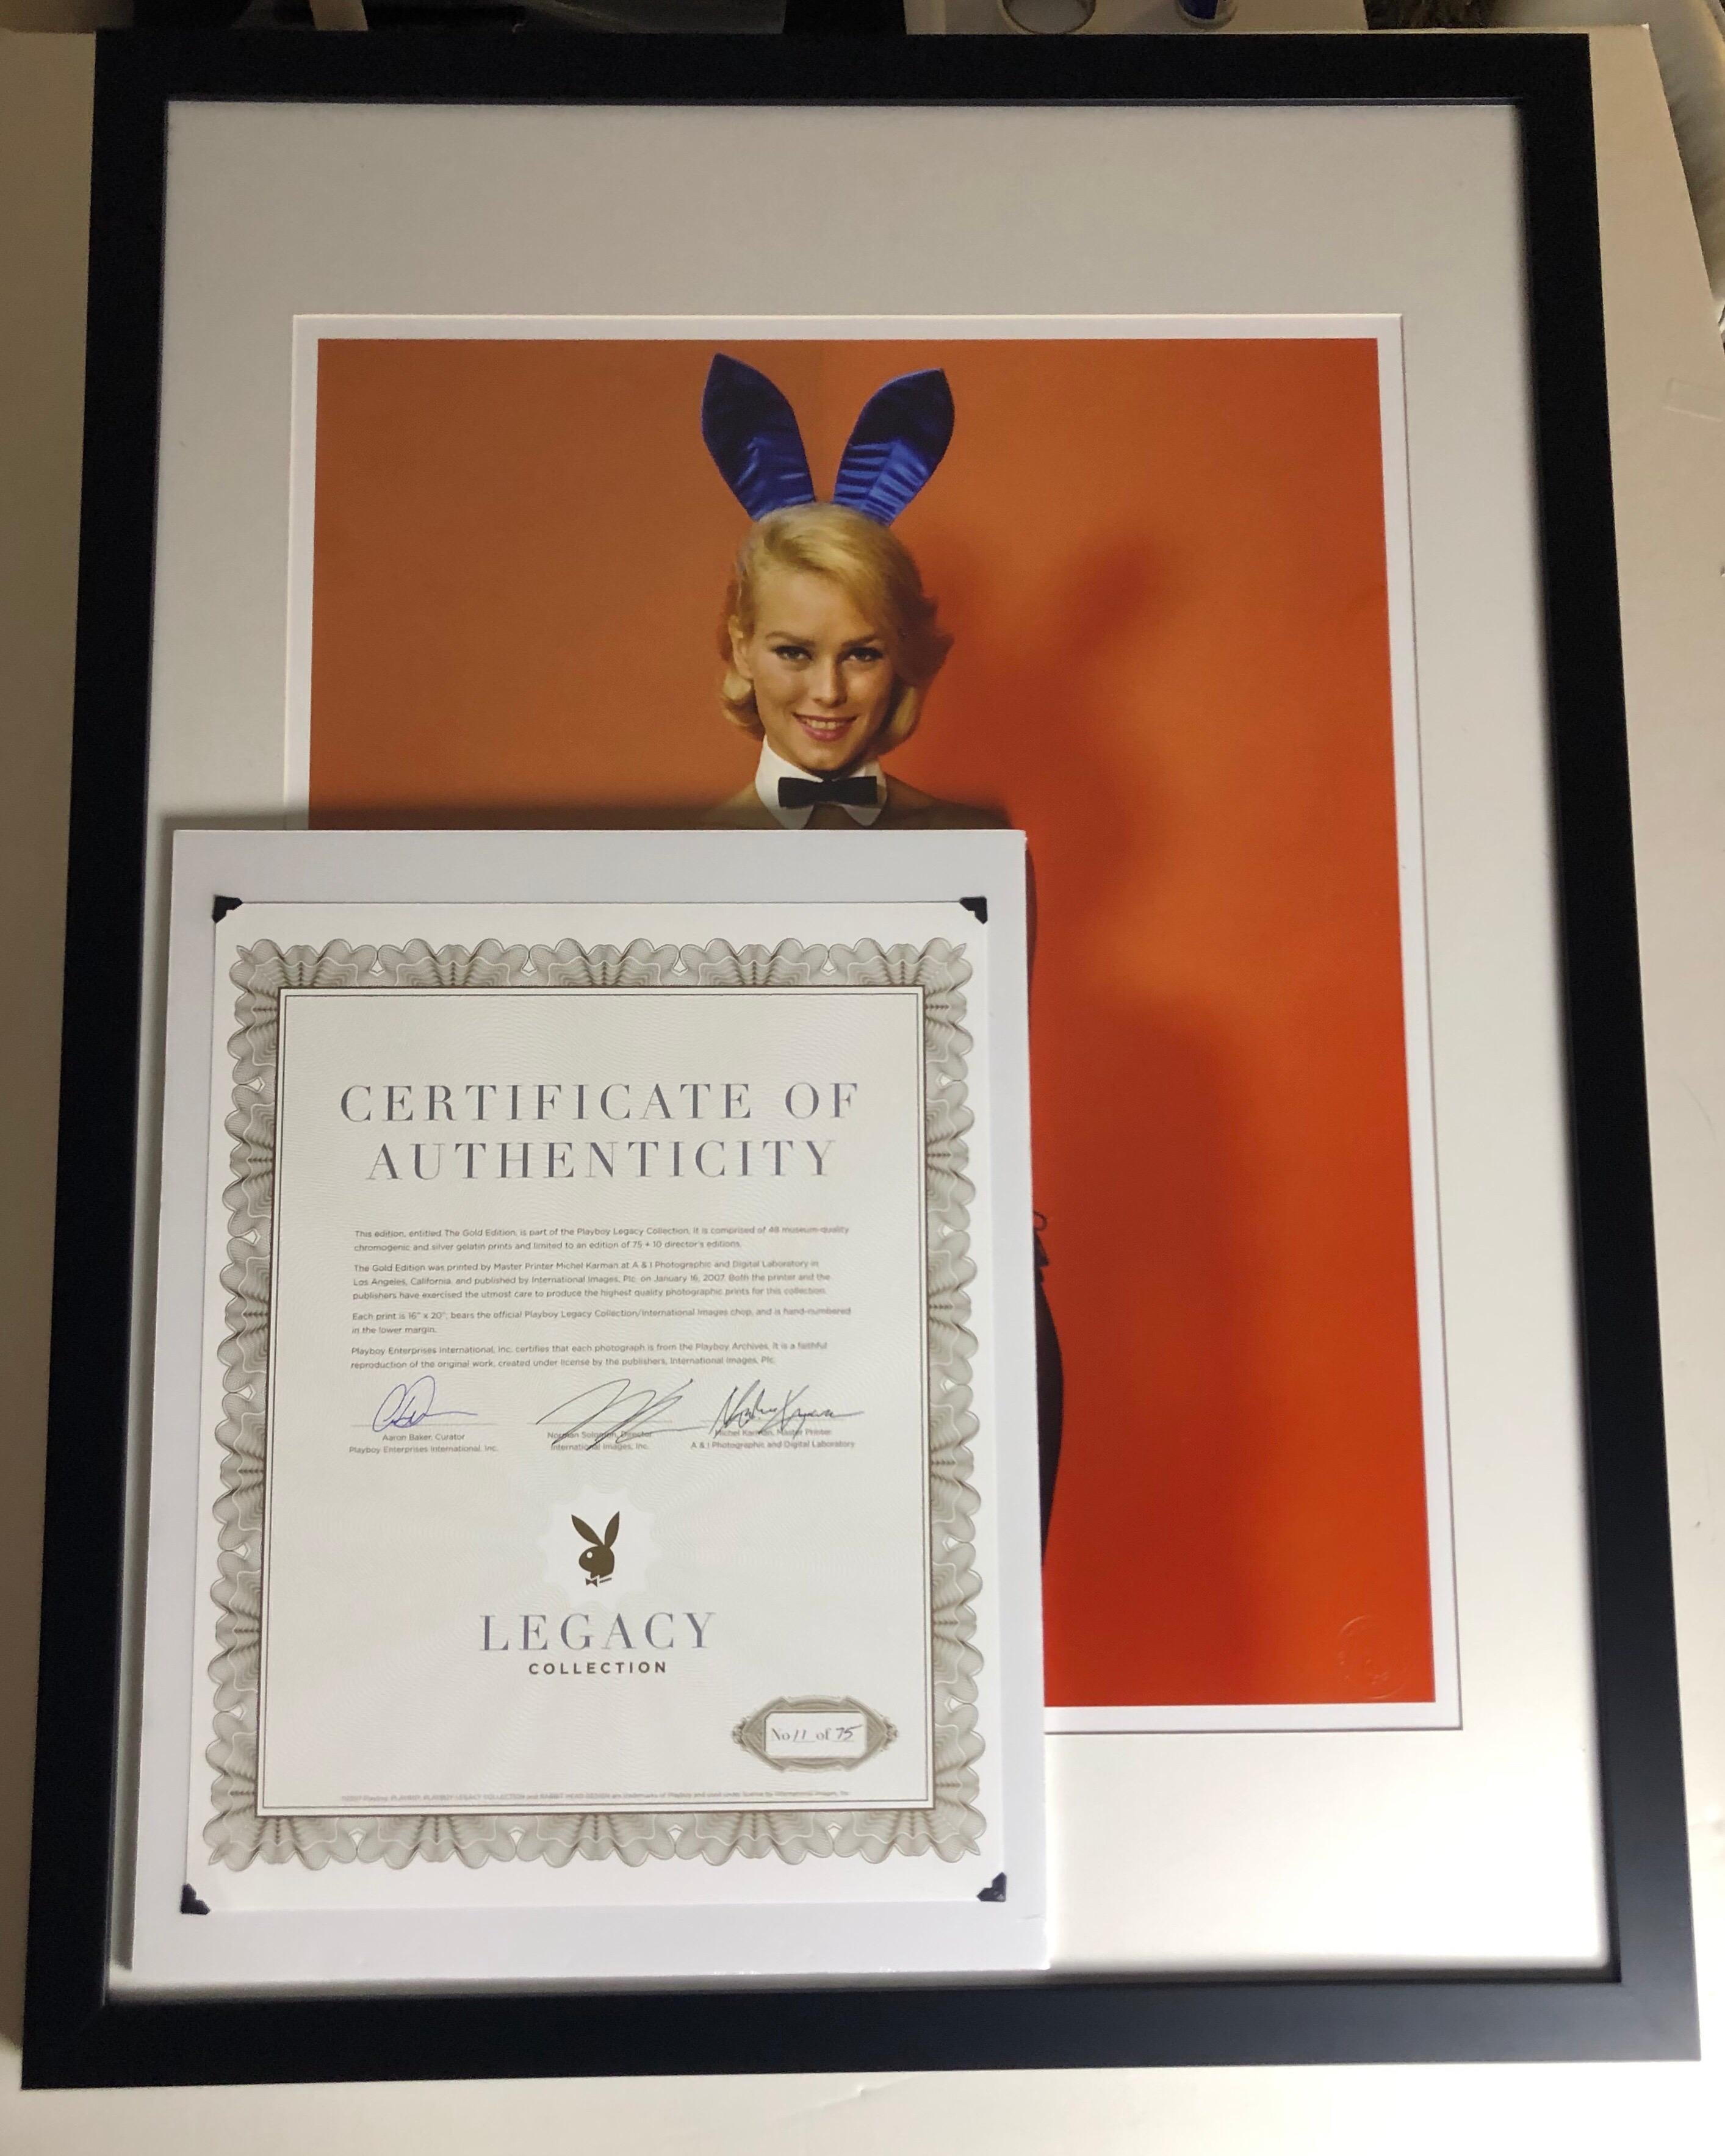 Playboy Legacy Collection “Bunnies Of Chicago” original fine art print featuring Cheryl Vincent. The image was shot in 1964 by renowned photographer, Stan Malinowski and was published in the August 1964 issue of Playboy.  The image was captured in